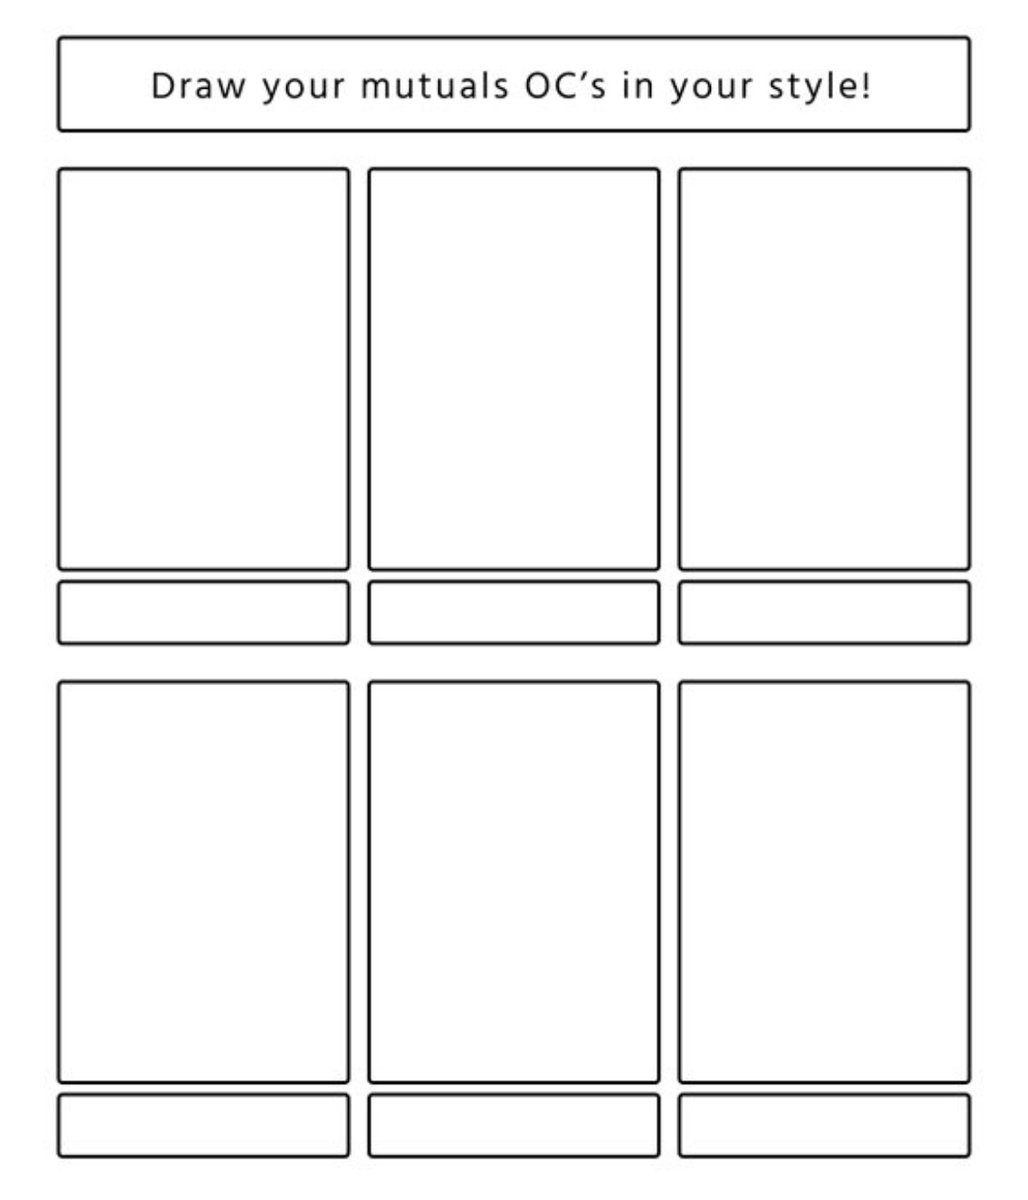 mutuals quick gimme your OCs, i forgot to plan something for today's stream! 